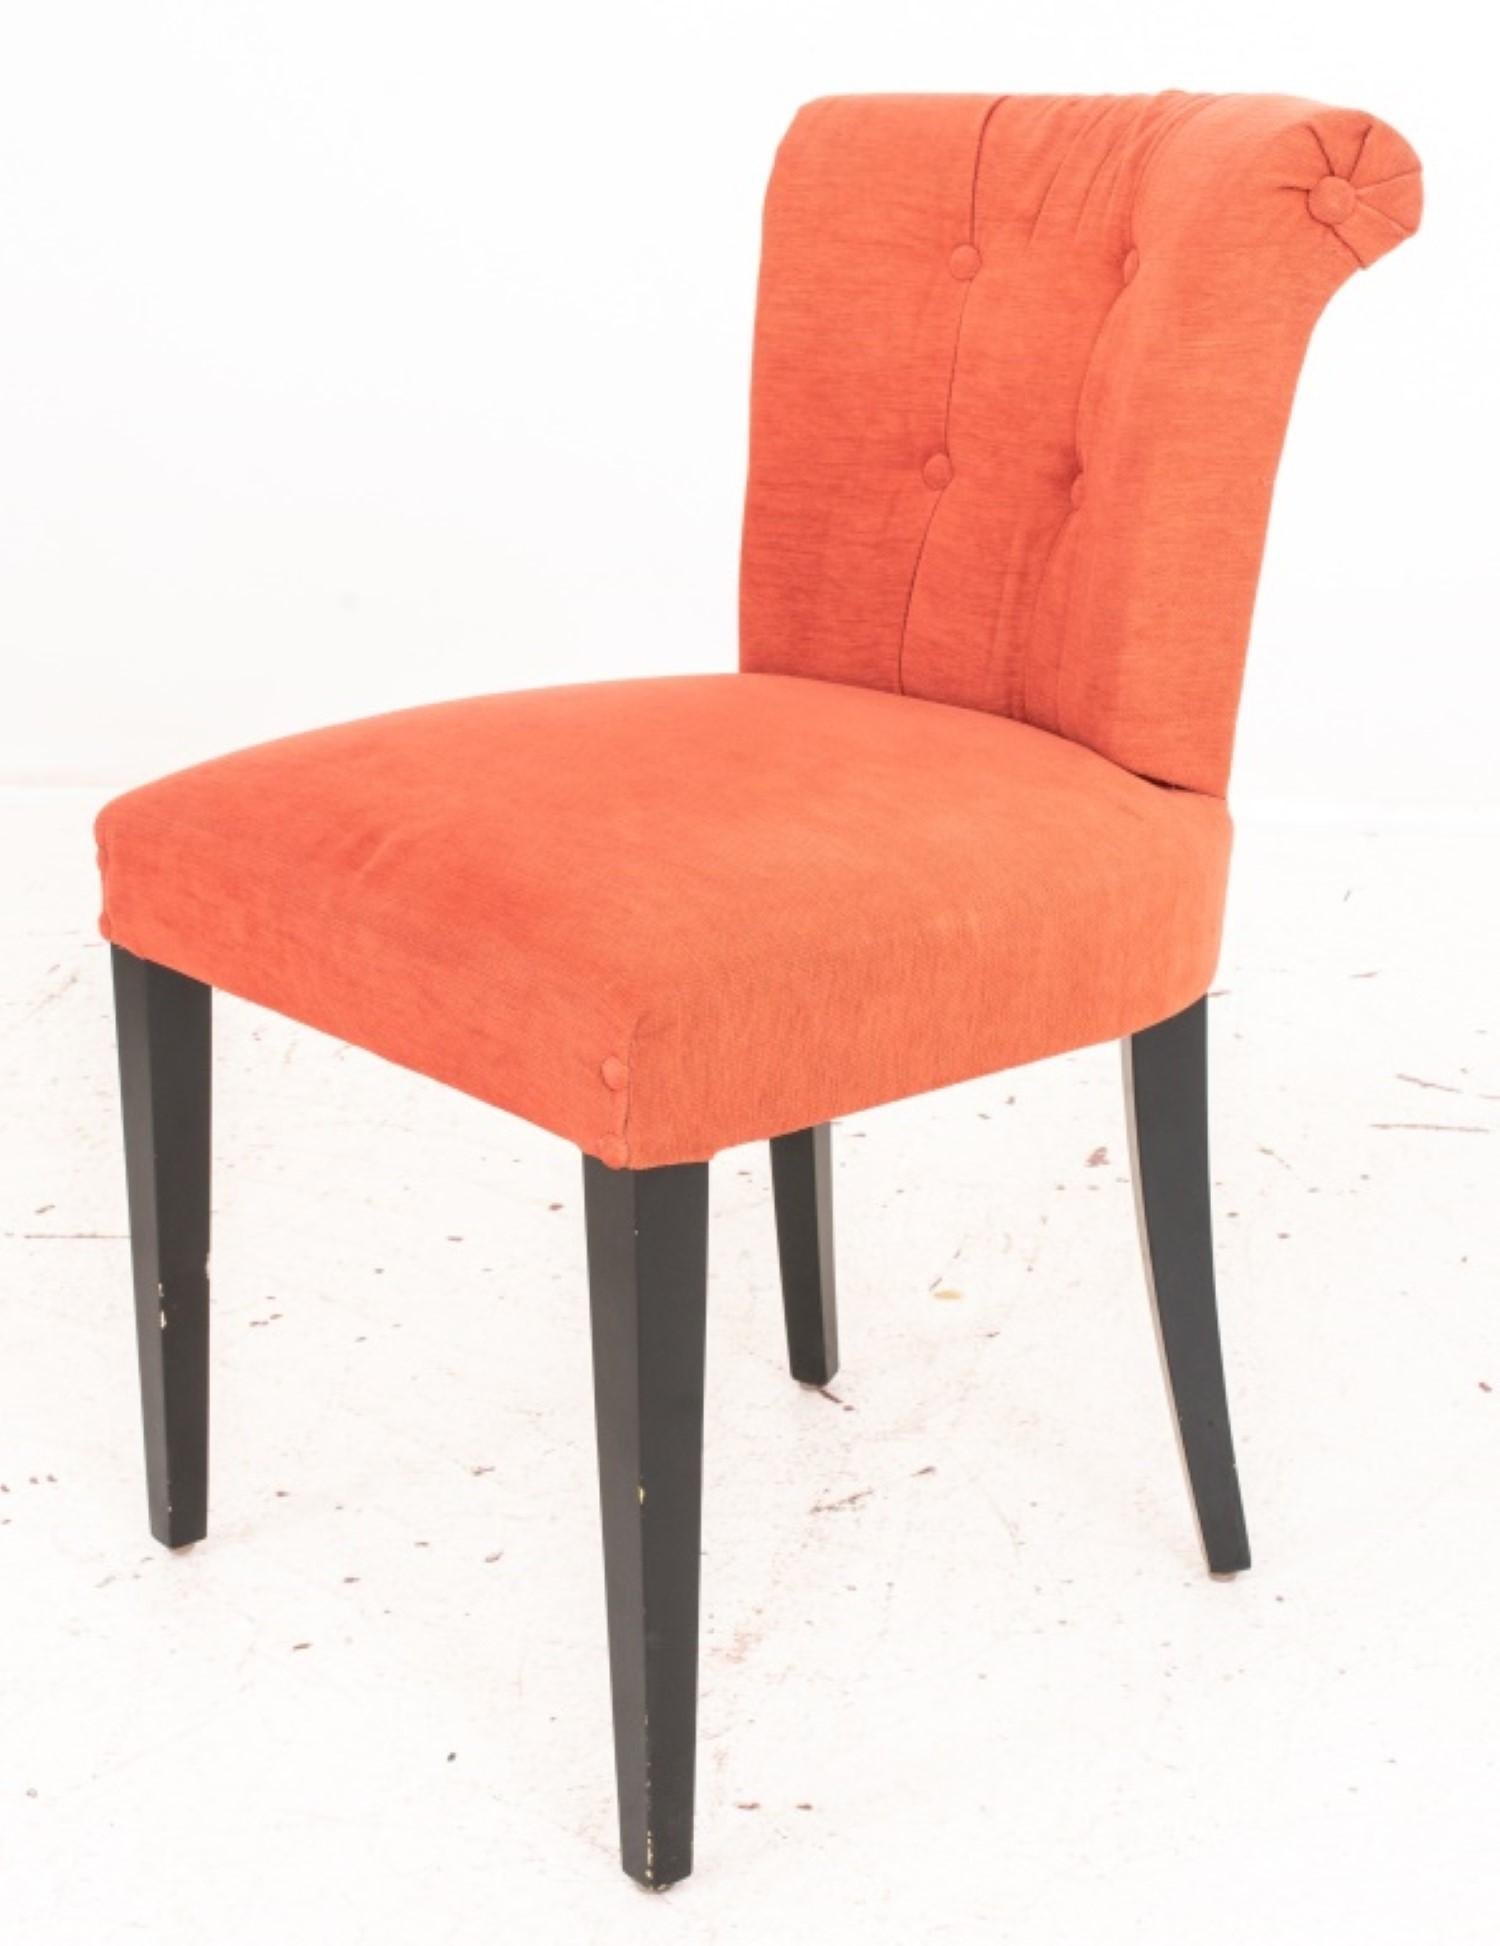 
The dimensions for the Italian upholstered scroll back side or dining chairs are as follows:

Height: 32